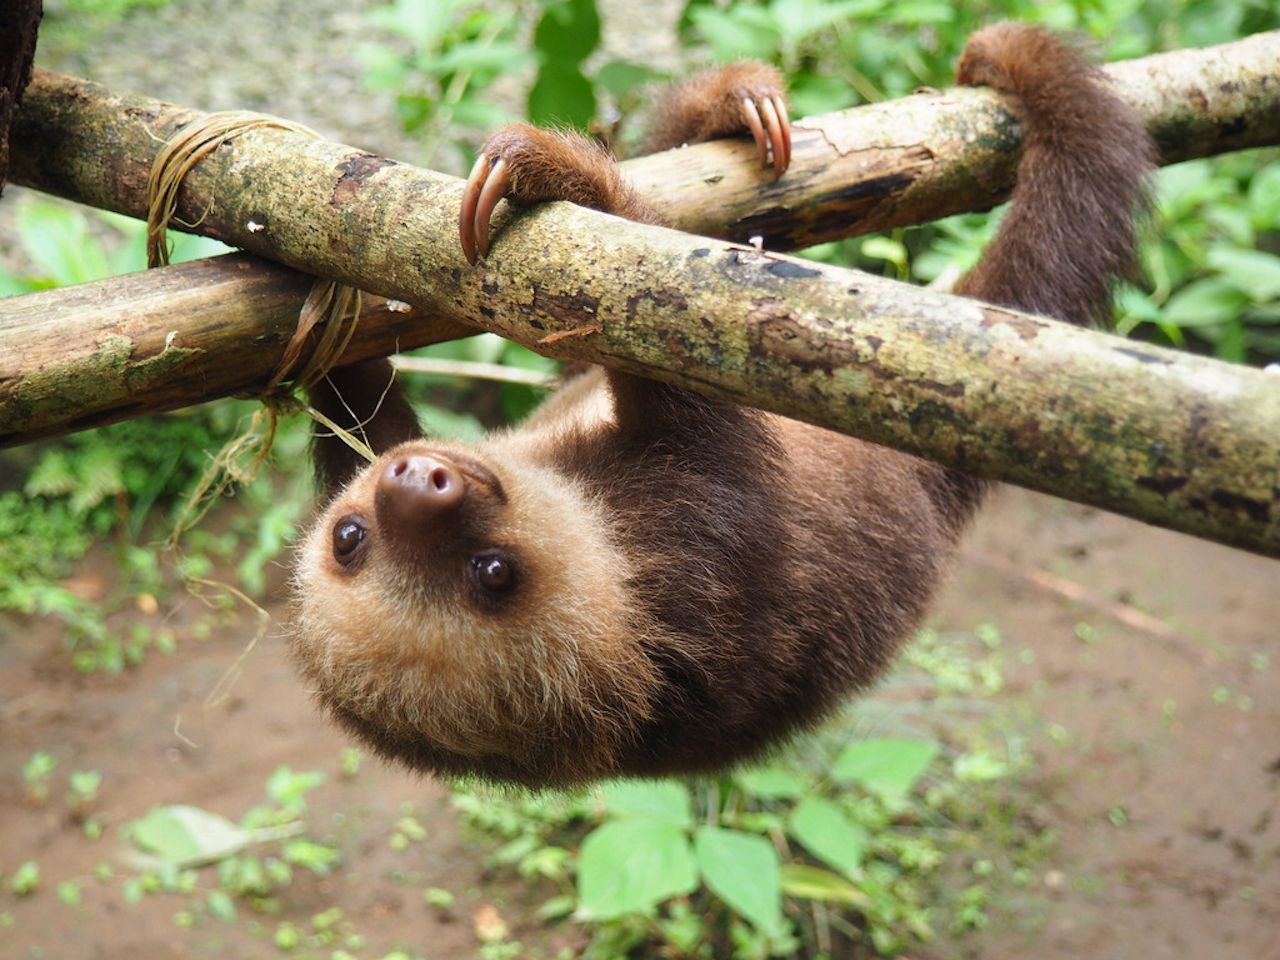 Baby sloth hanging from a tree